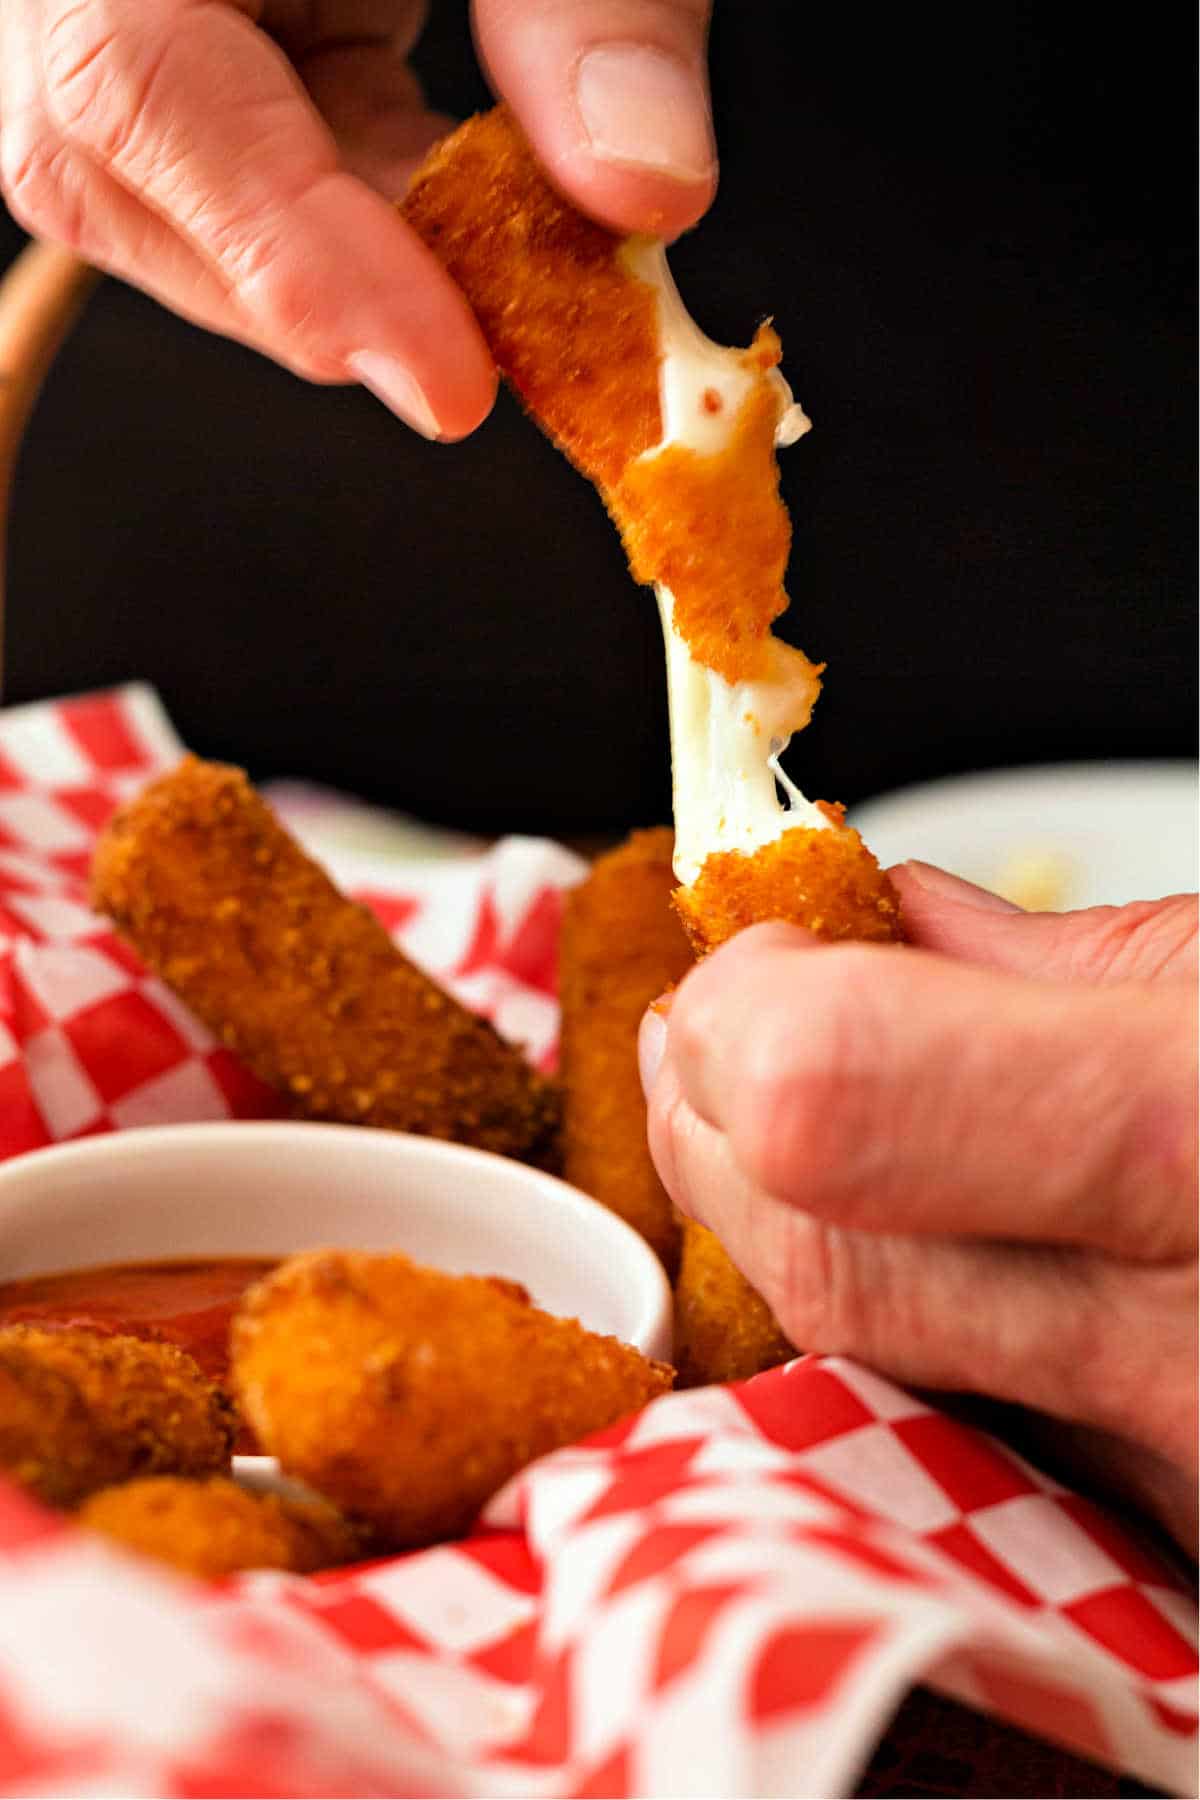 Close up of hands pulling a fried mozzarella stick apart to show the stretchy cheese insides.